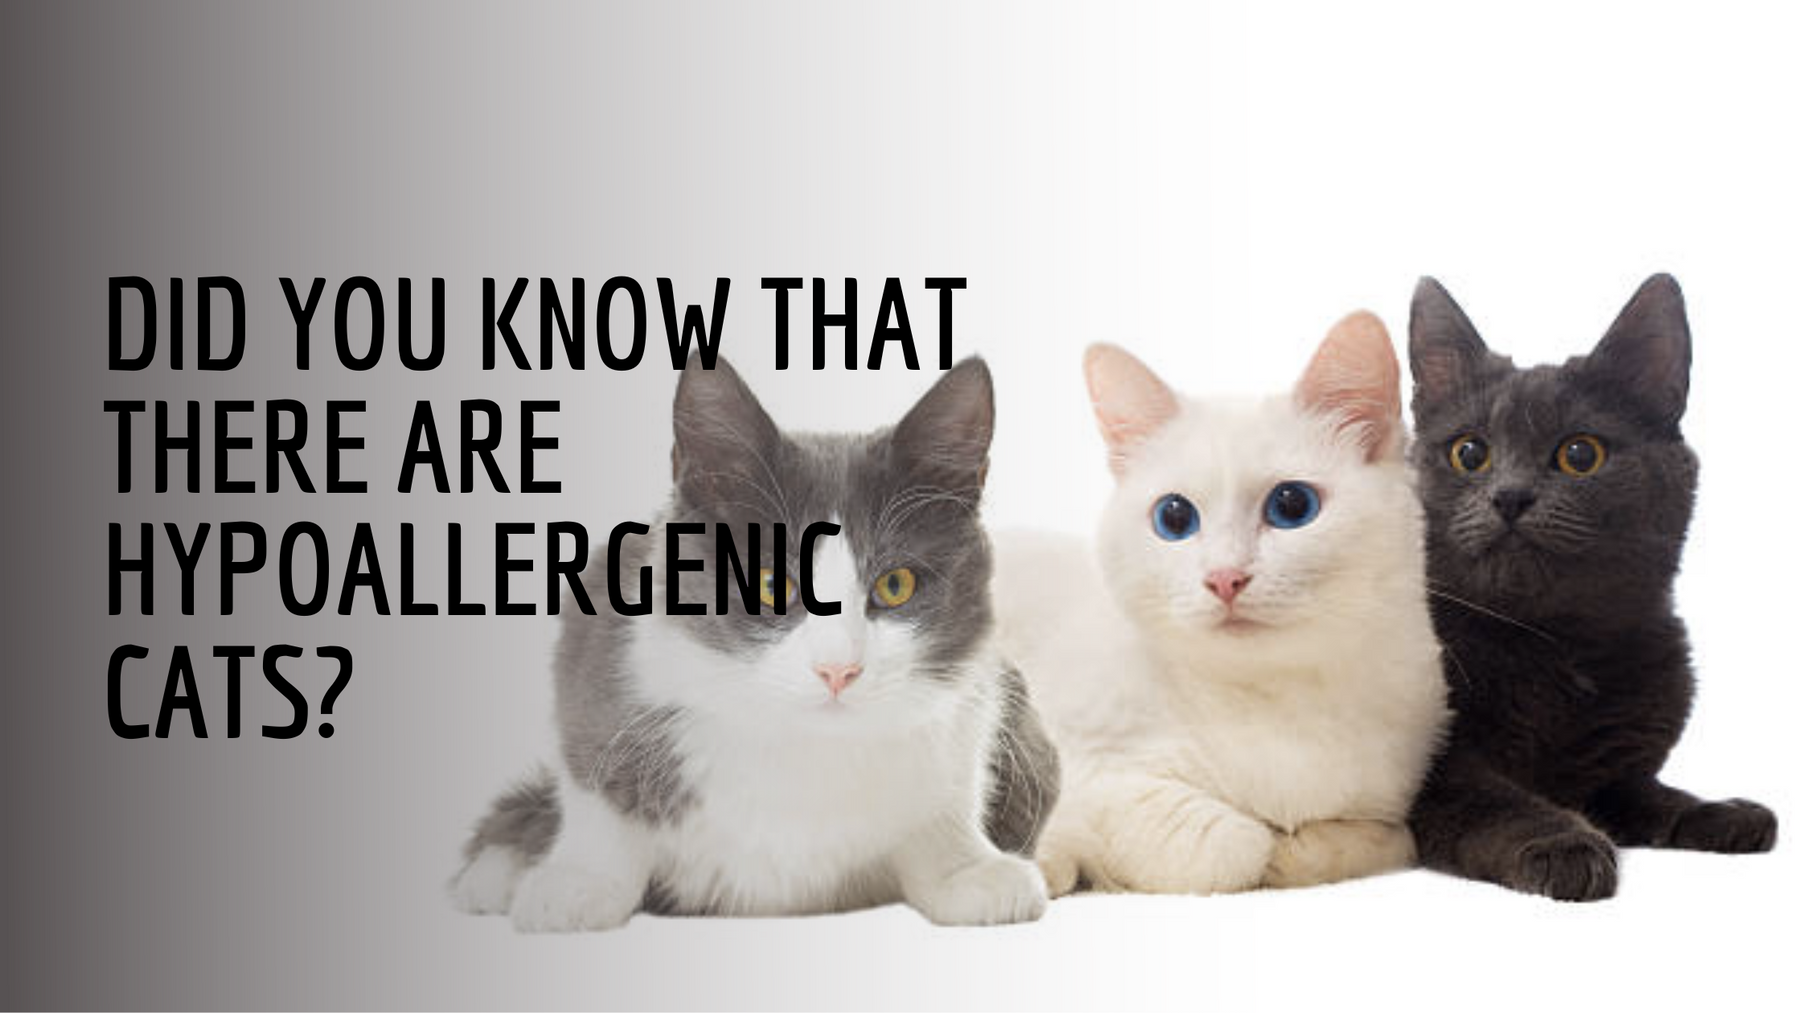 Did You Know That There Are Hypoallergenic Cats?